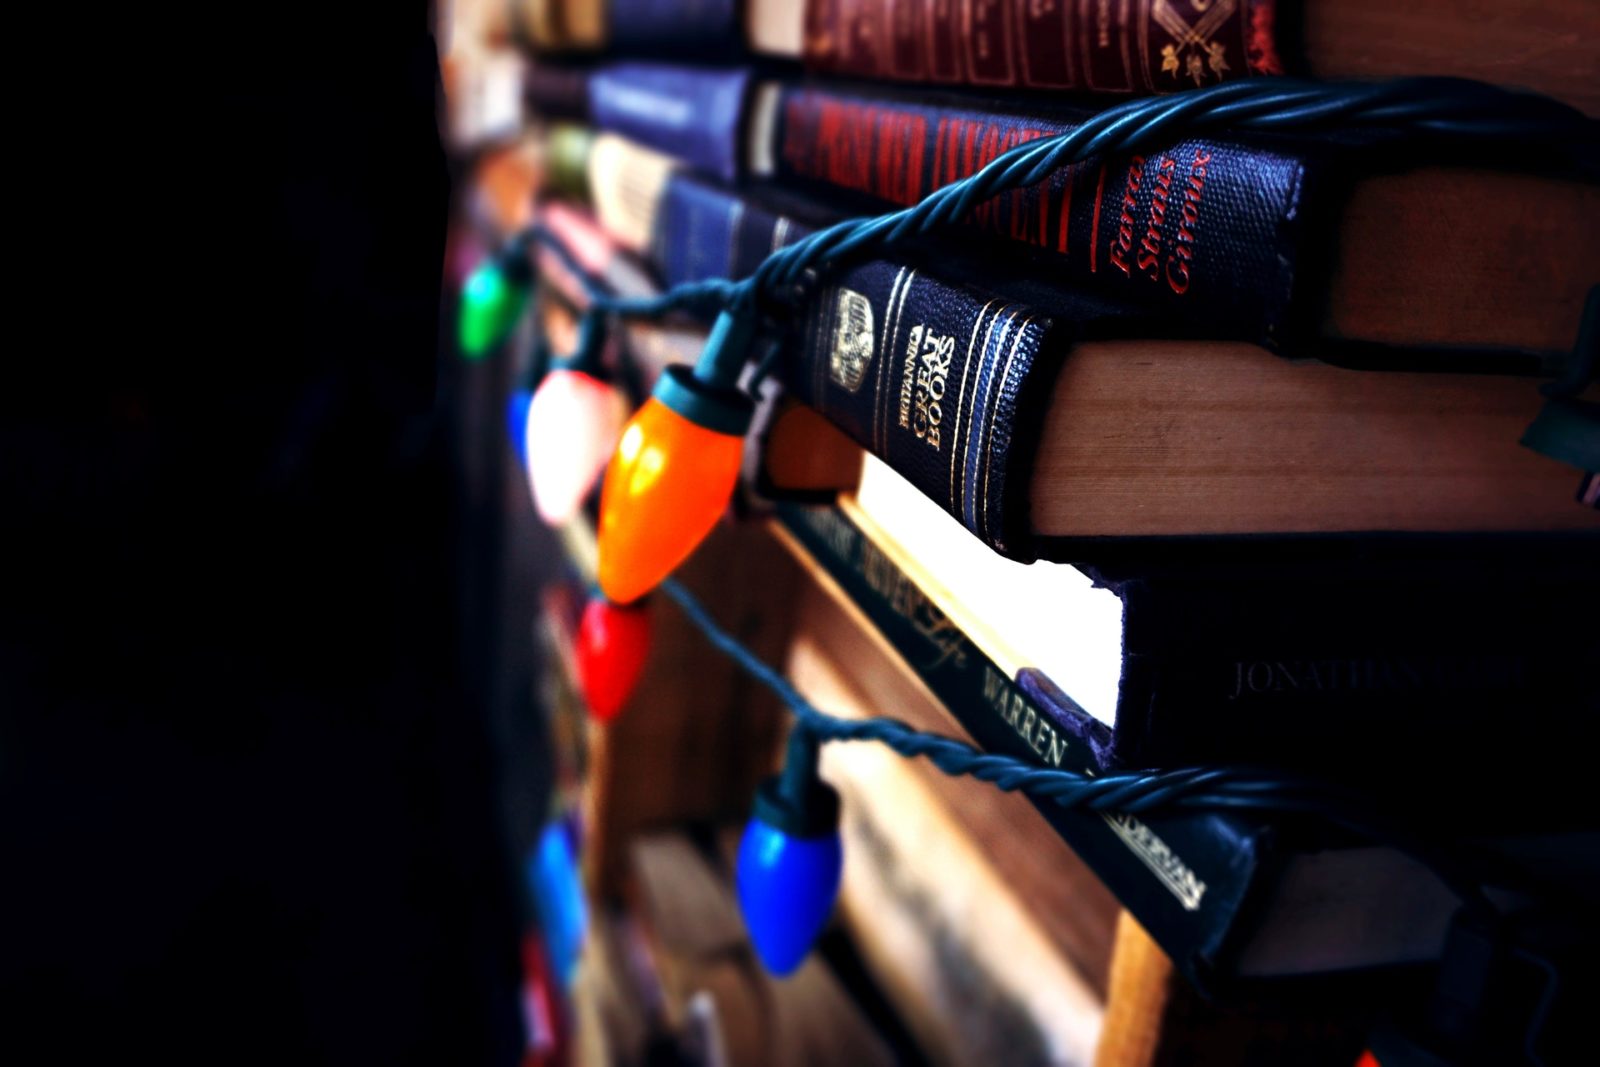 books stacked and draped in christmas lights